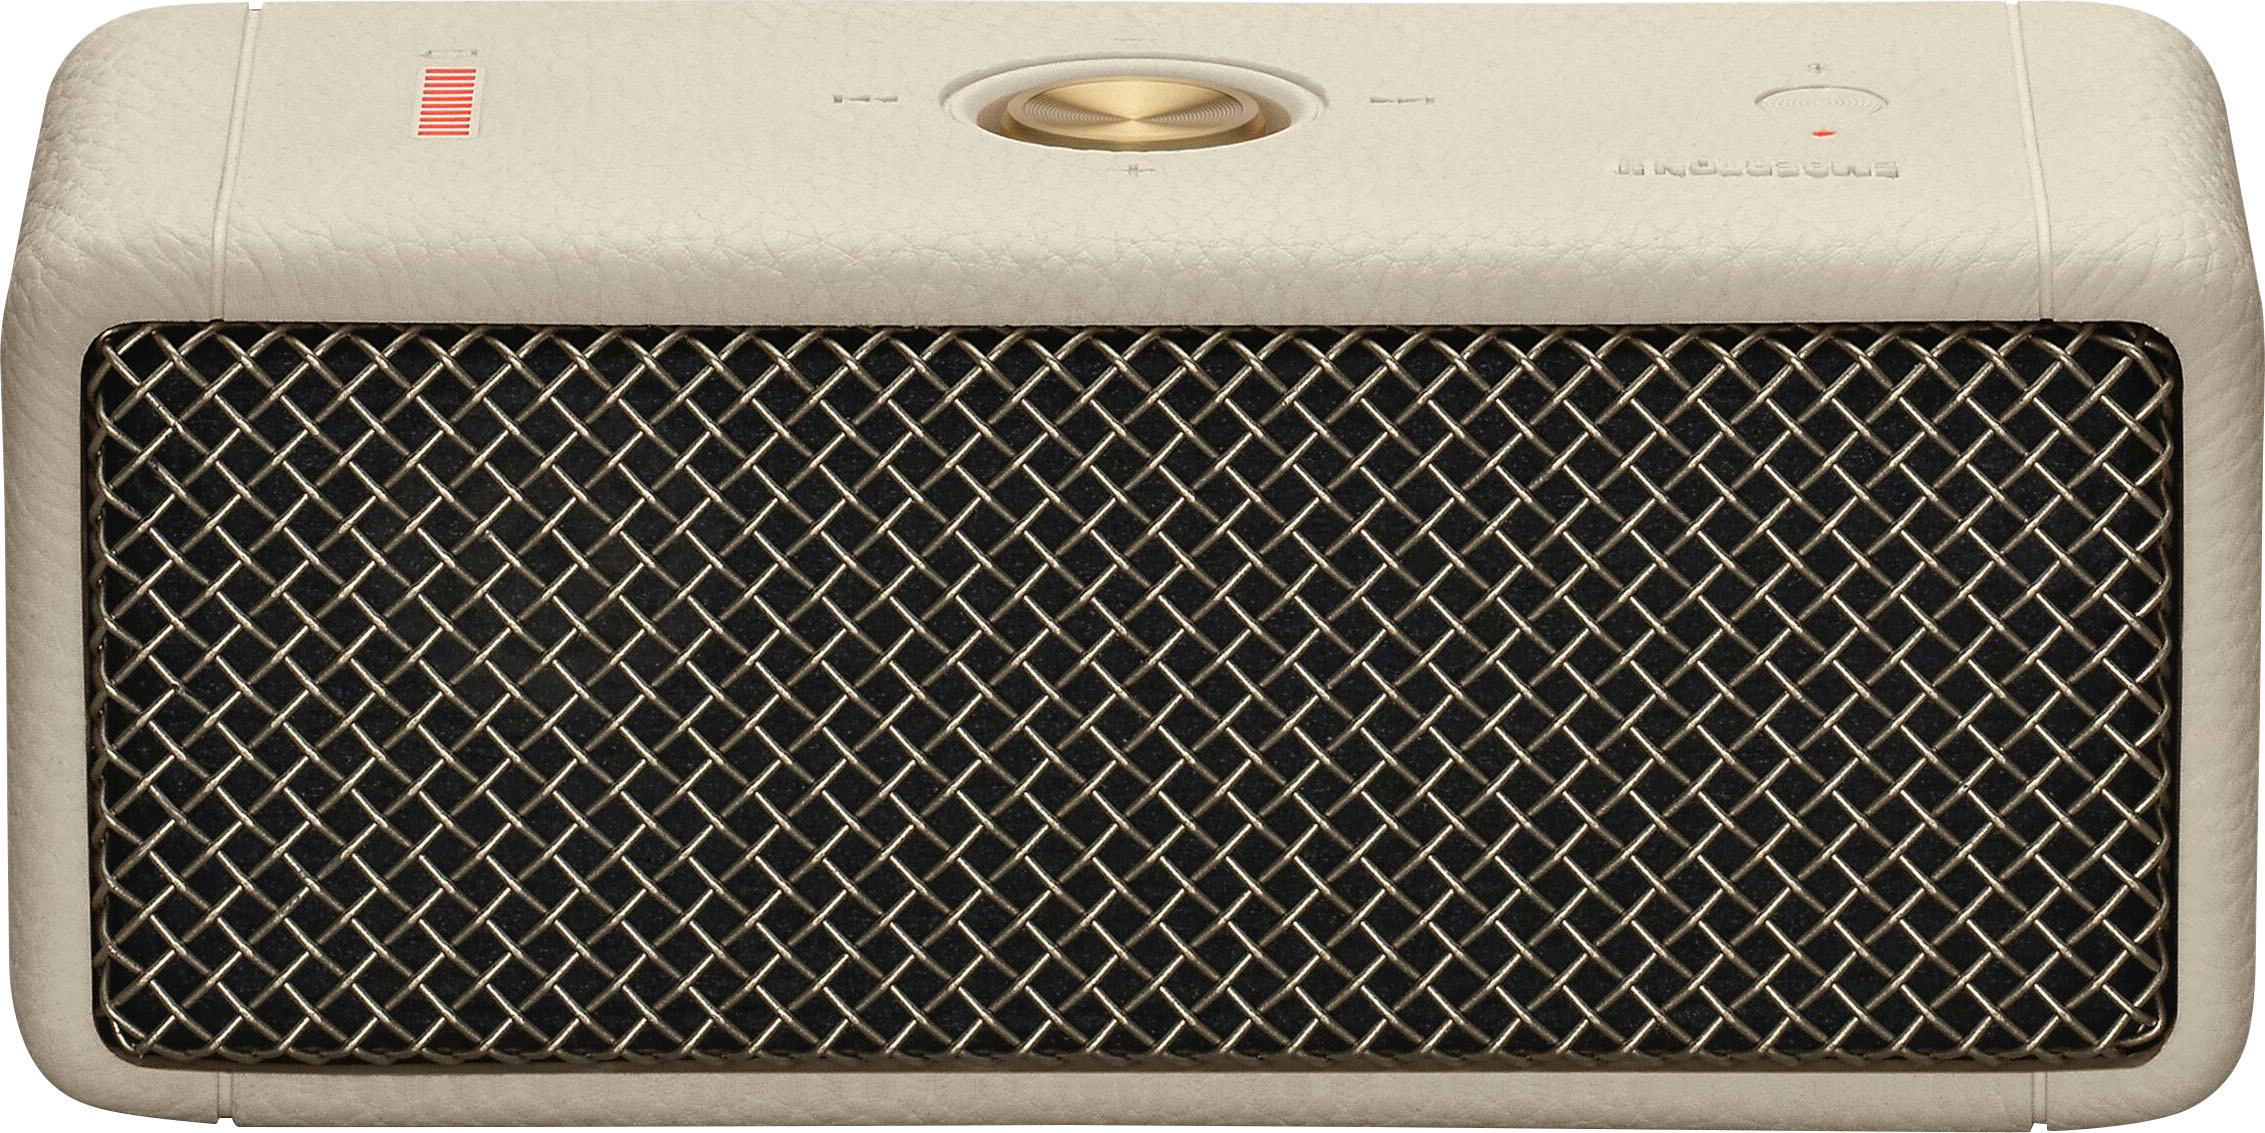 Take it to 11 with the Emberton II portable speaker from Marshall